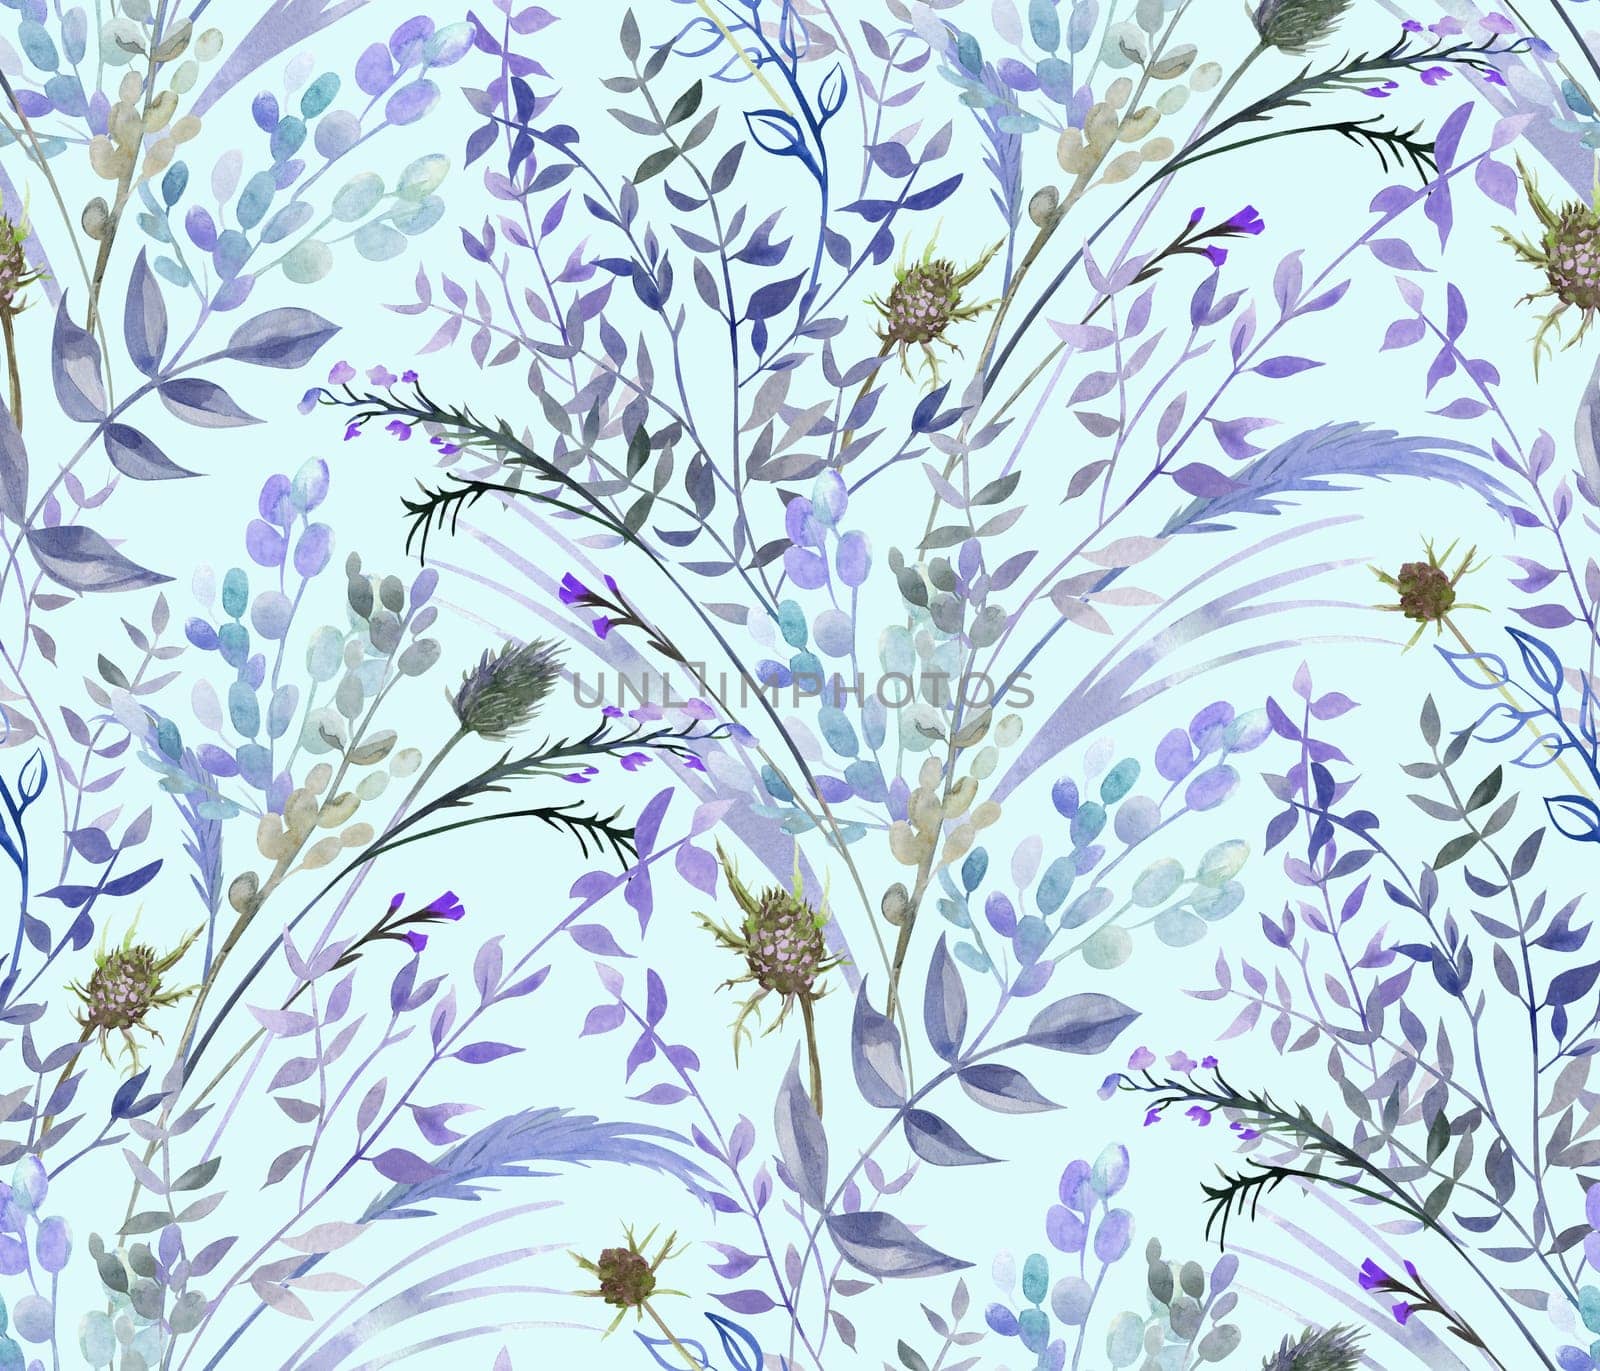 Seamless watercolor pattern with boho style fern branches and leaves drawn by MarinaVoyush